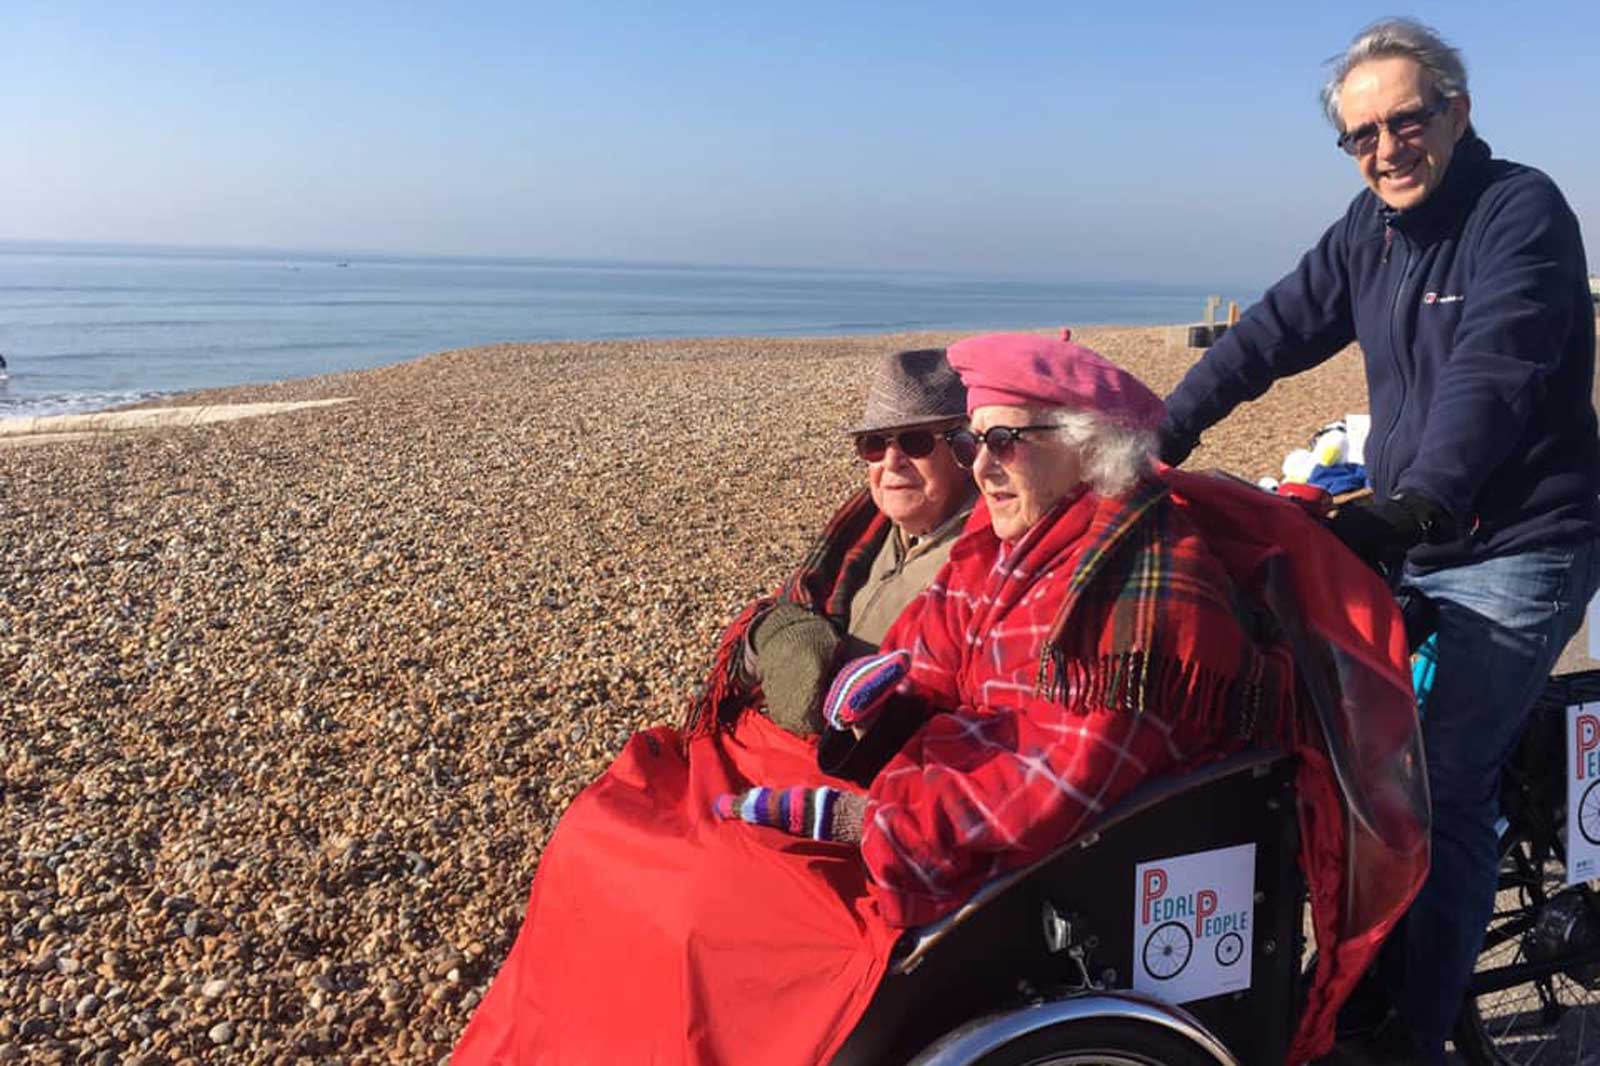 RWE's community funds support the most vulnerable and tackle social isolation | Rampion Offshore Wind Farm